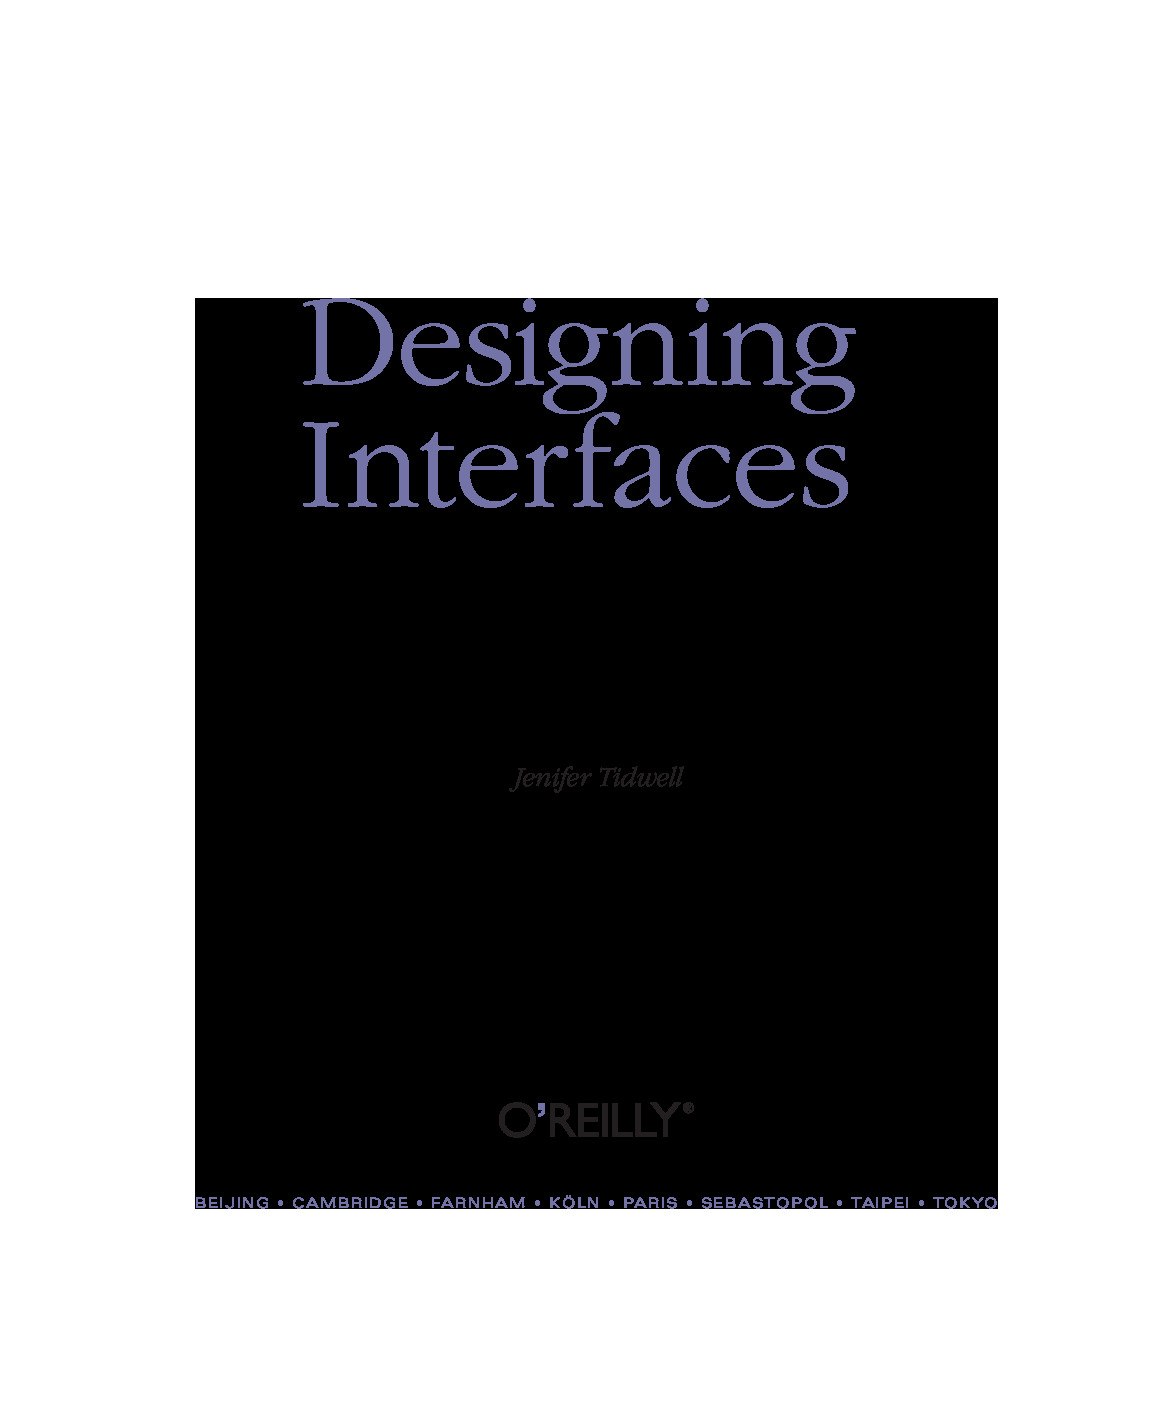 Designing Interfaces – Patterns for Effective Interaction Design